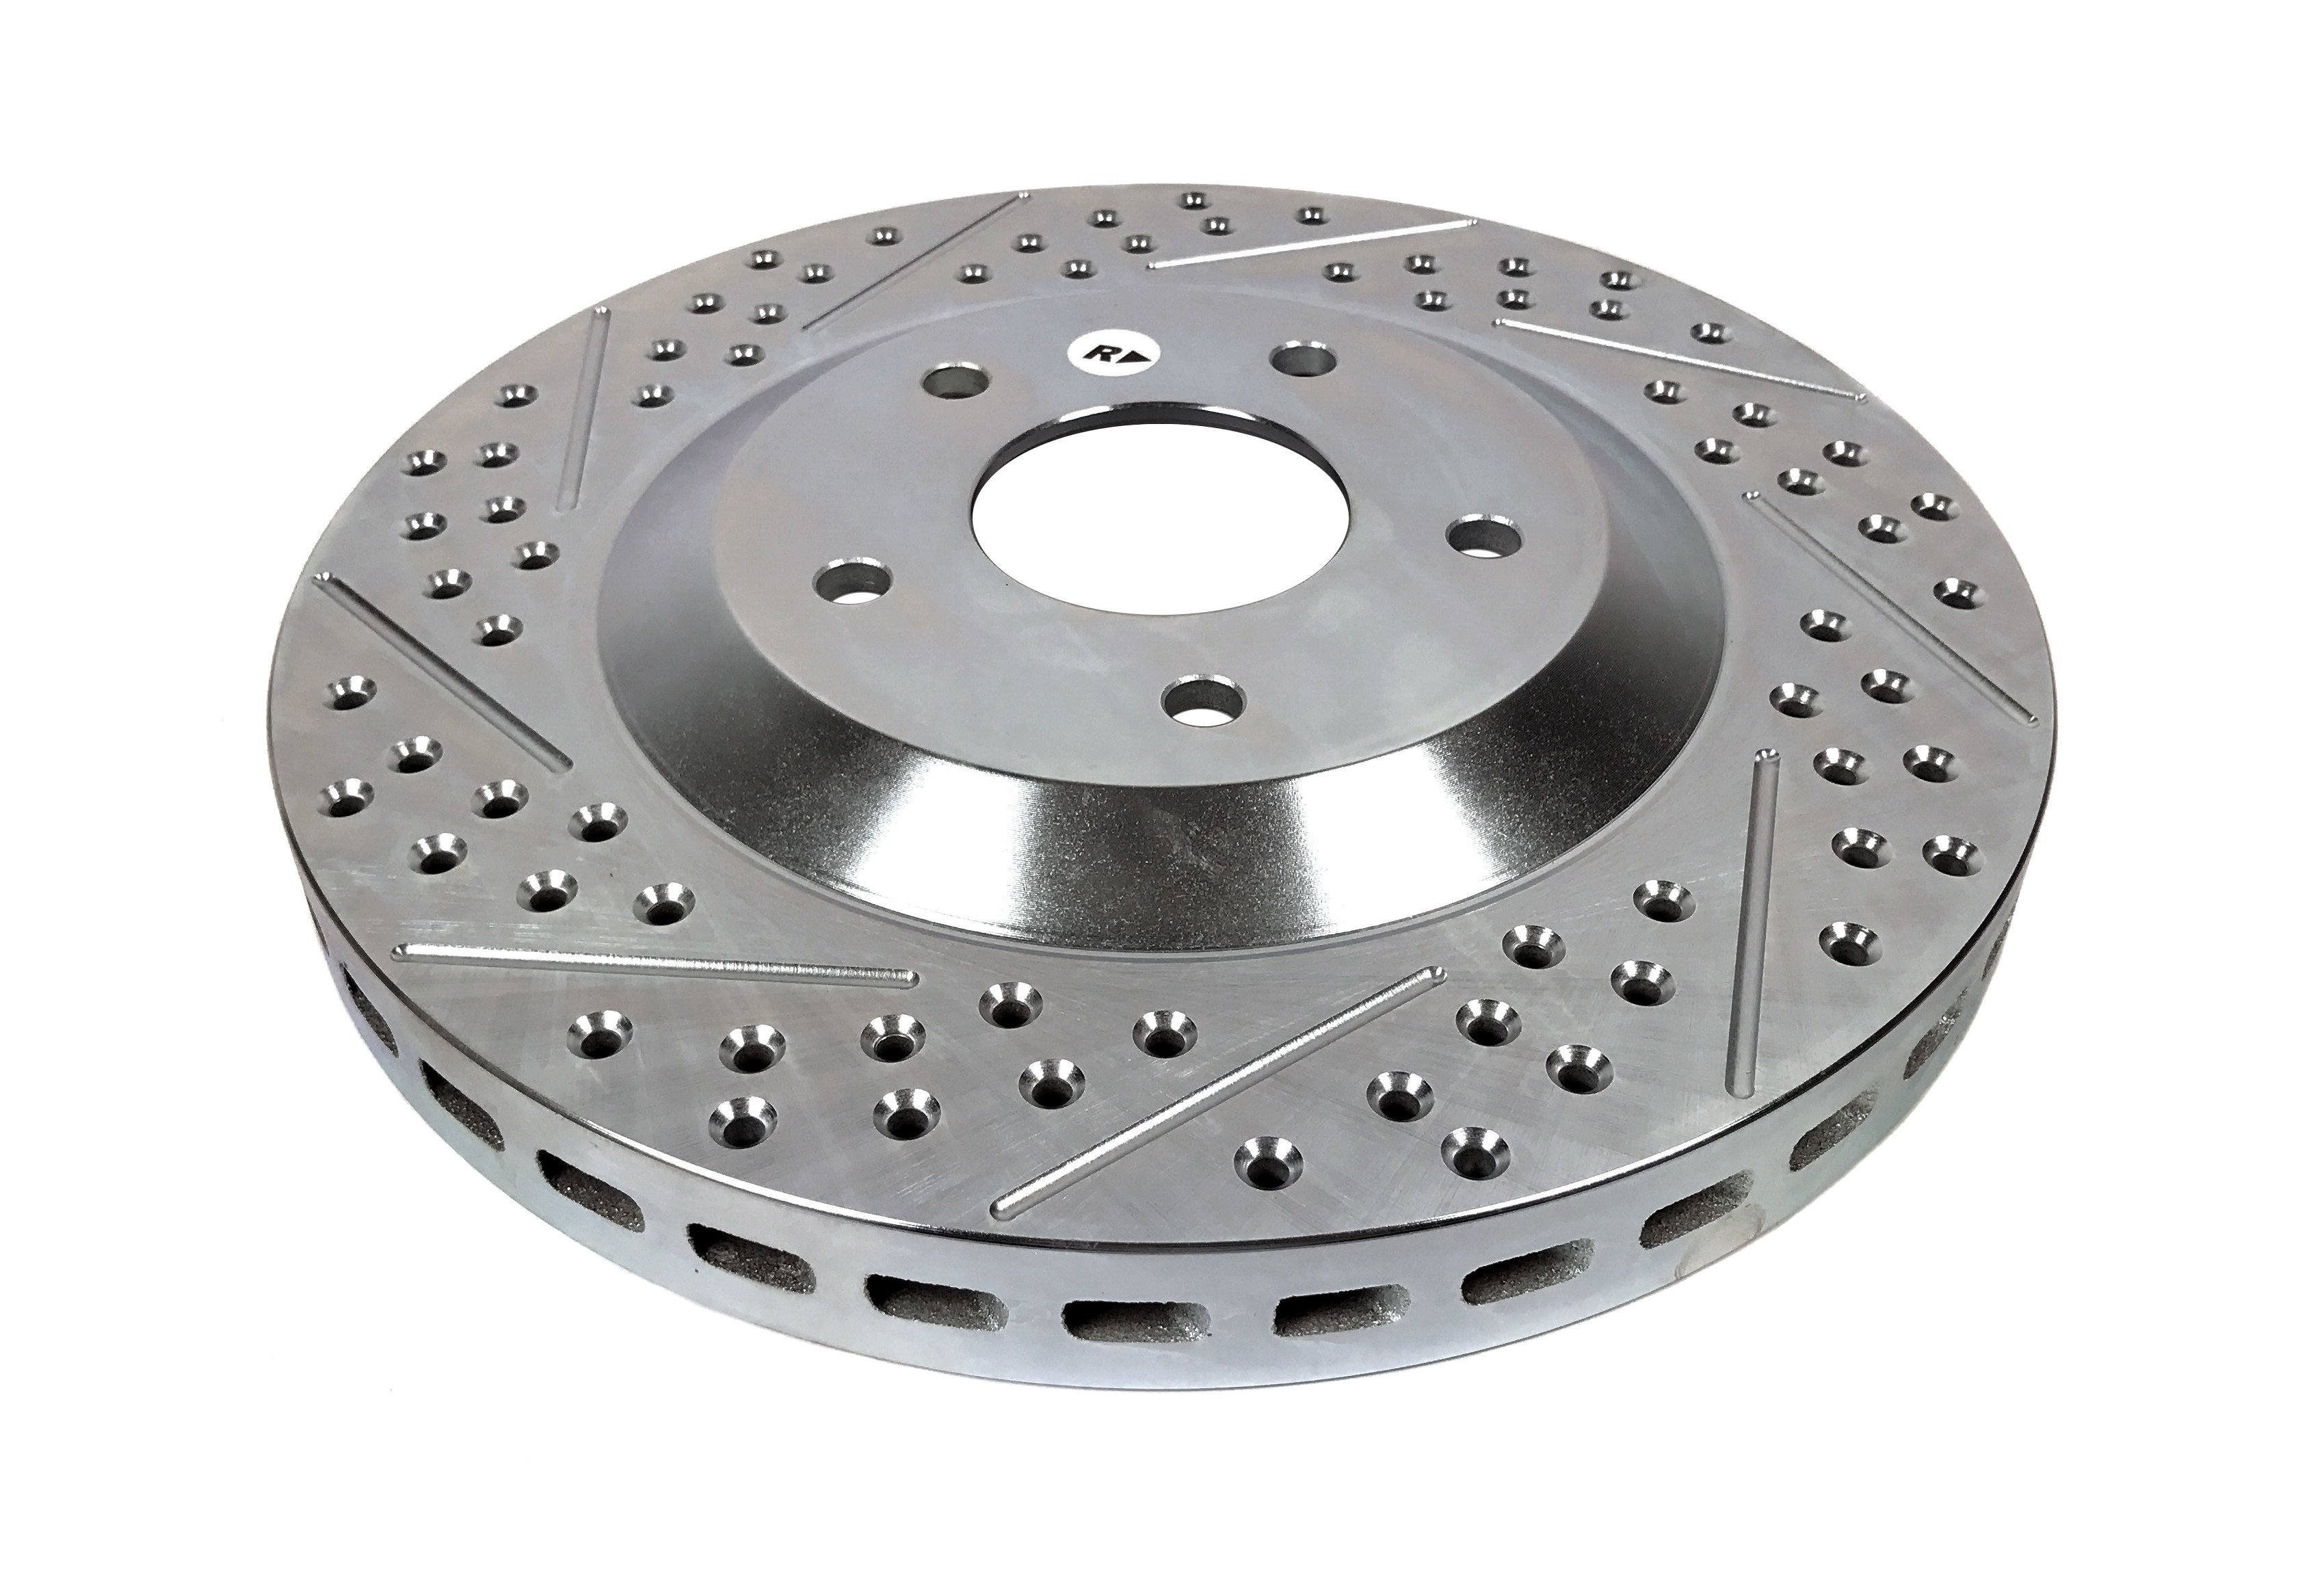 Baer Sport Rotors, Front, Fits Various Cadillac and Chevrolet Applications